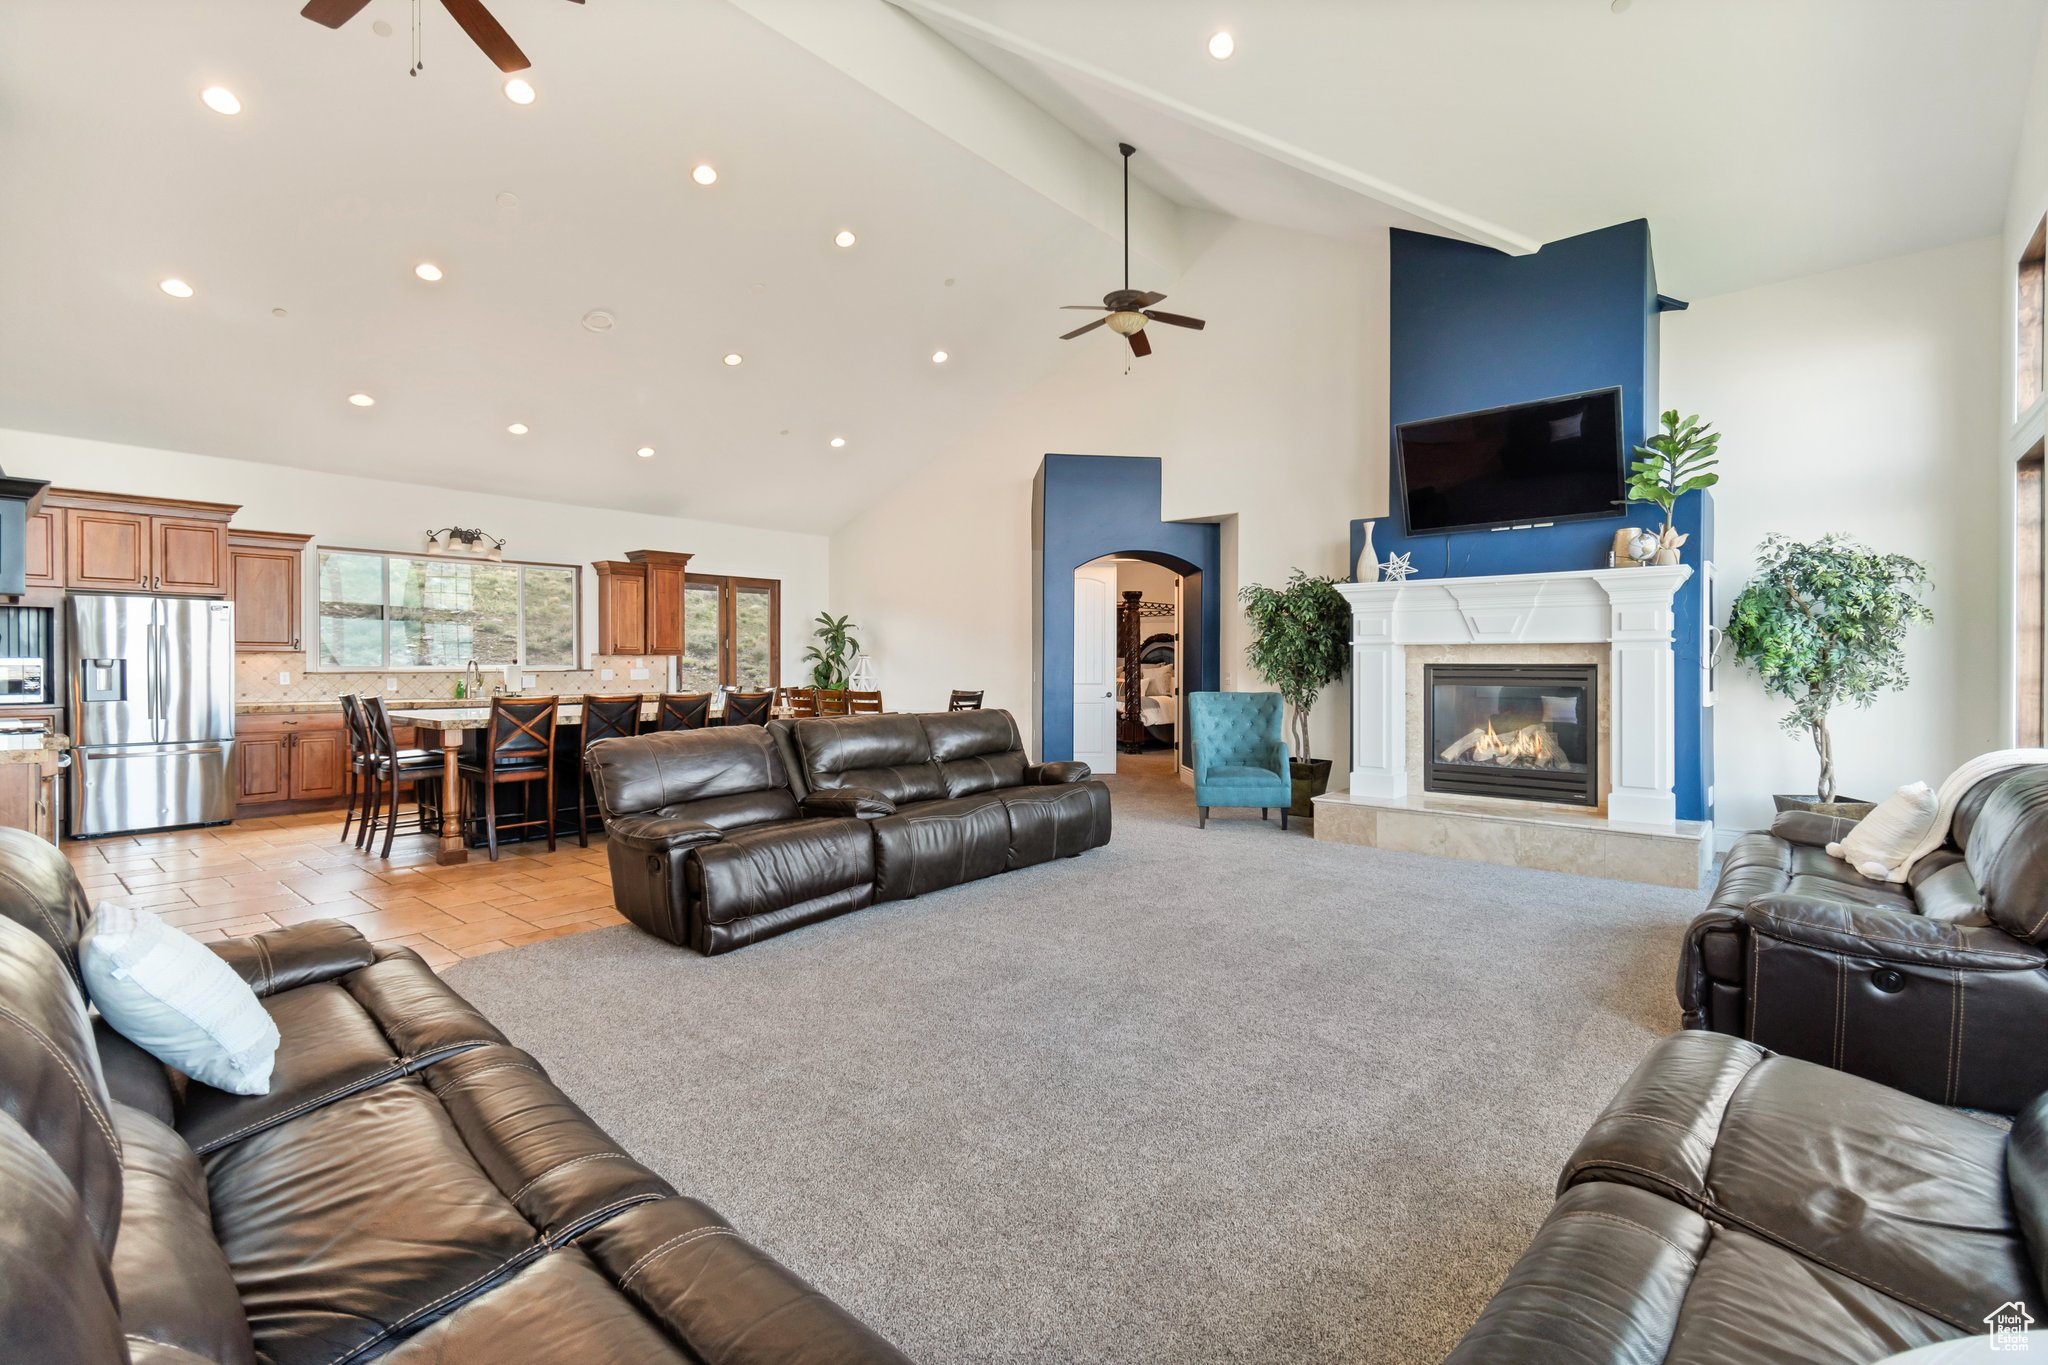 Carpeted living room with high vaulted ceiling, beamed ceiling, and ceiling fan